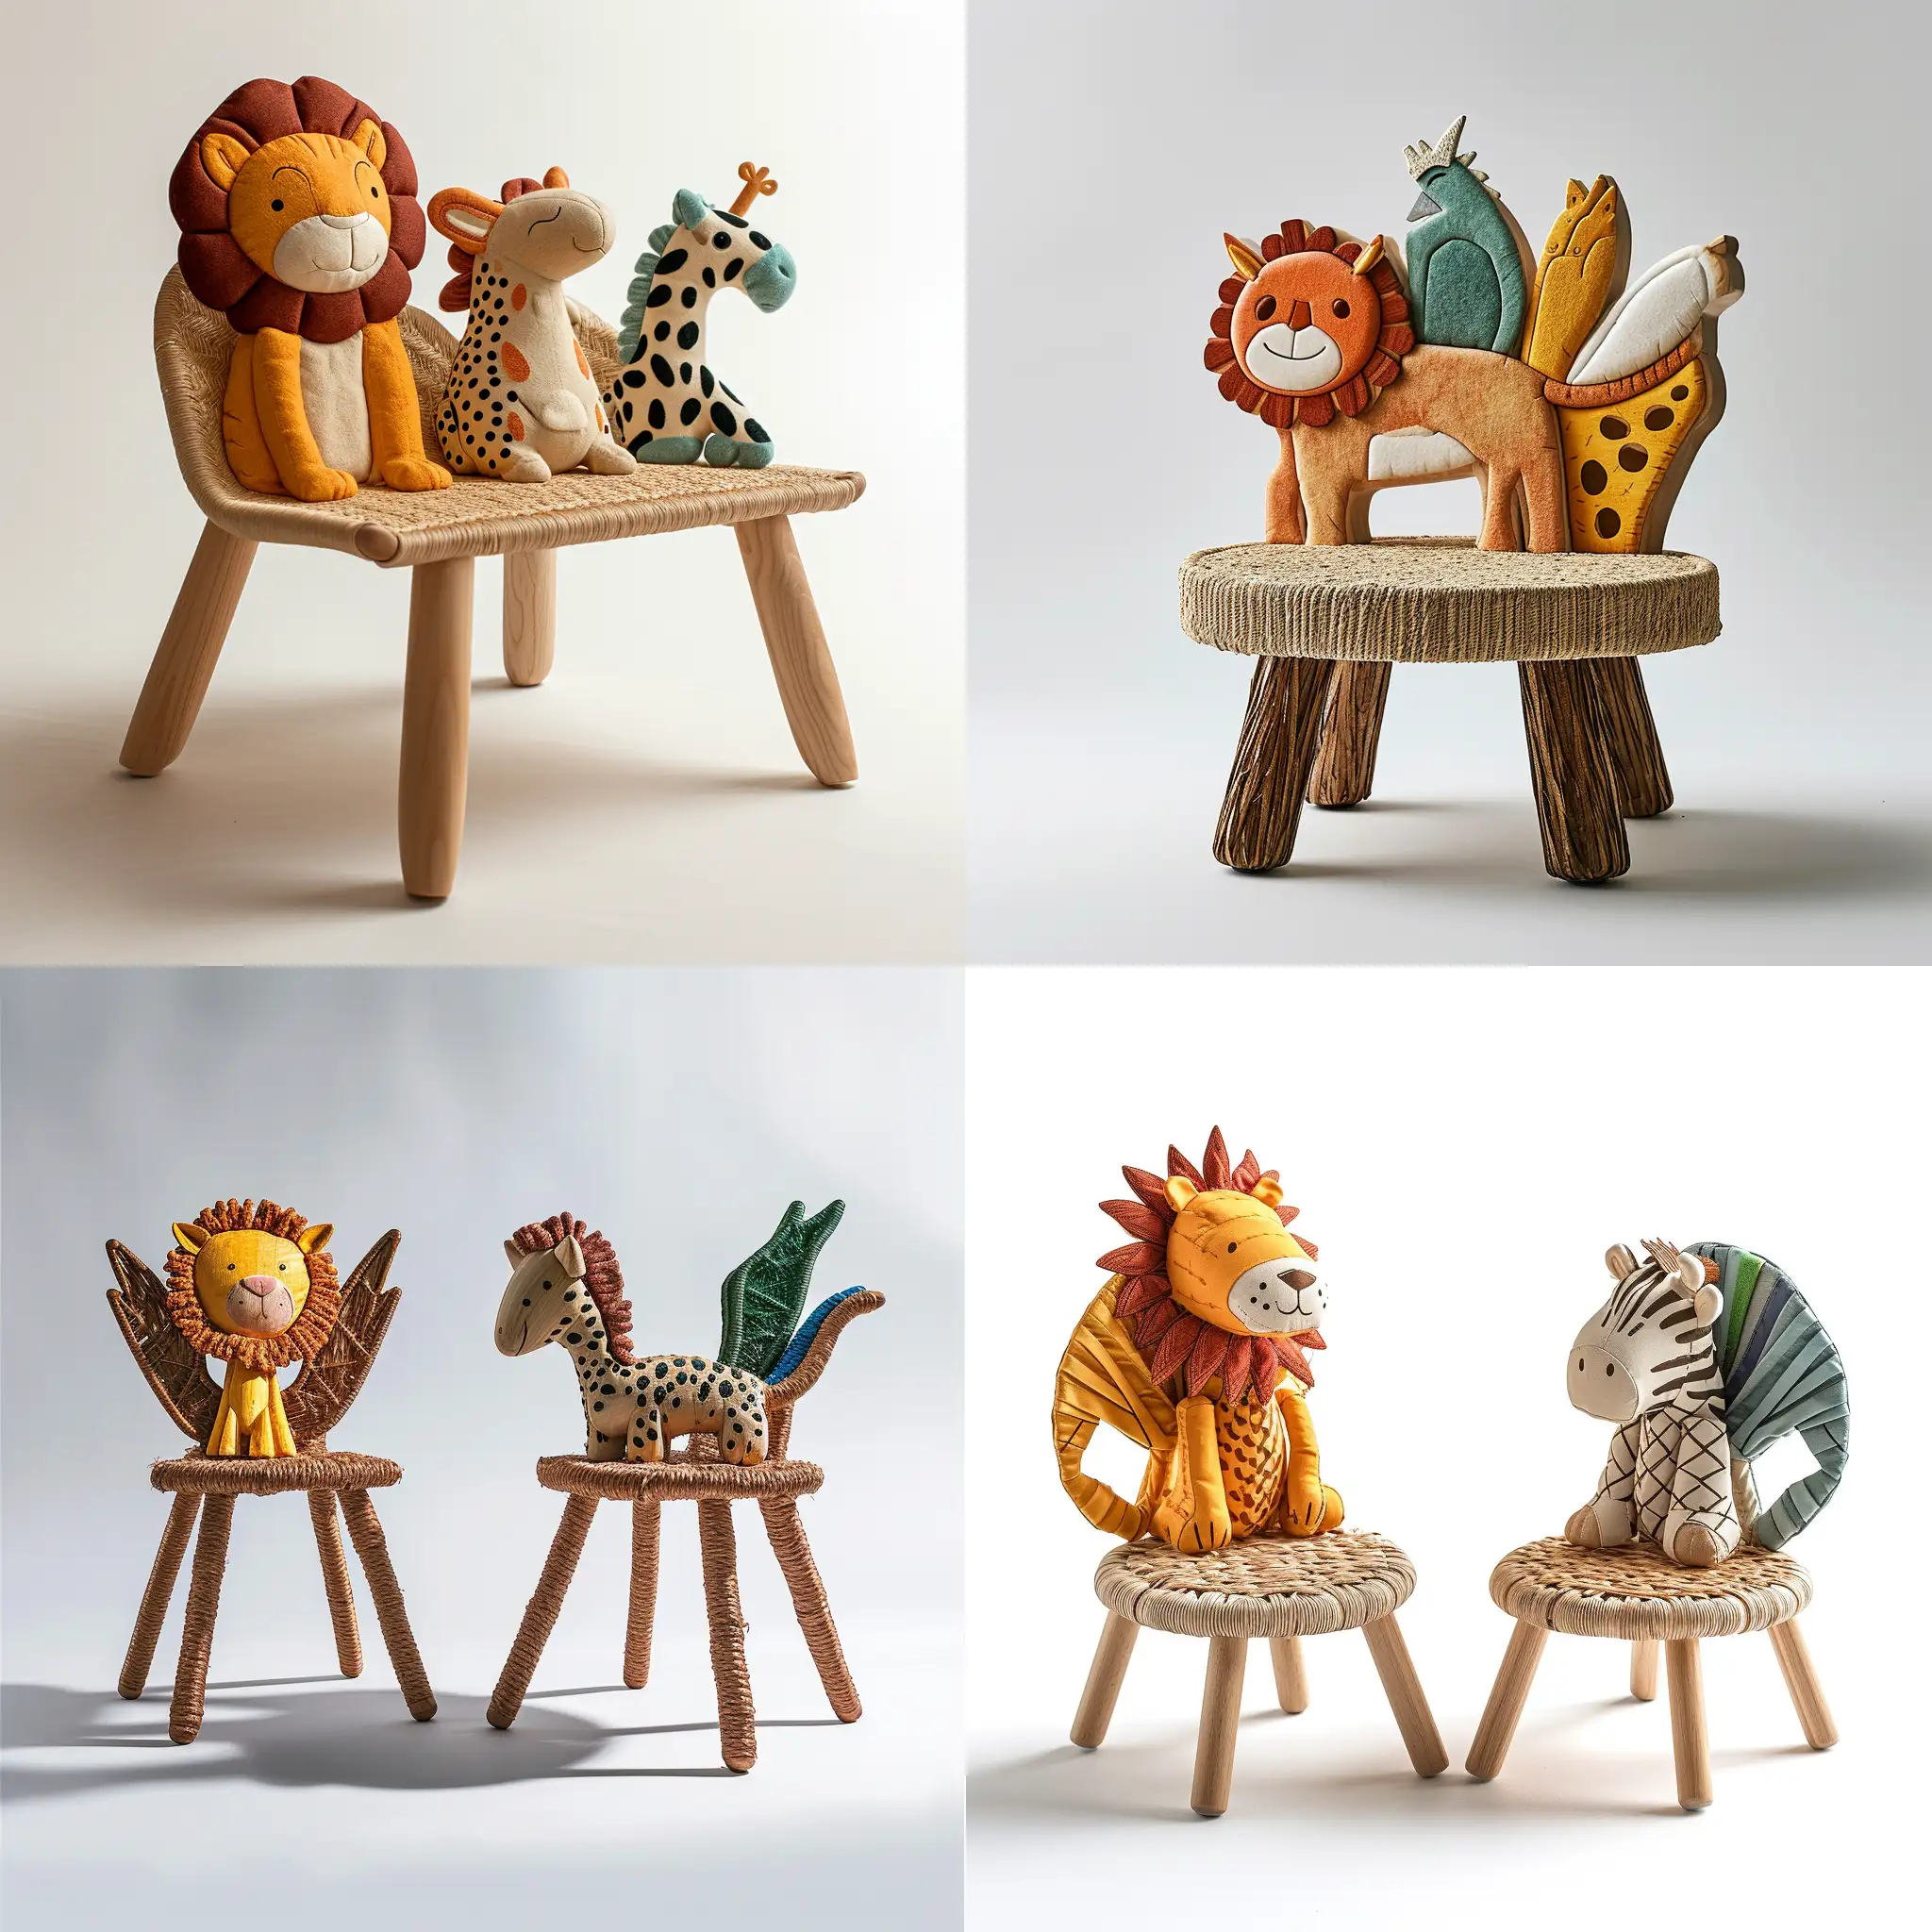 imagine prompt: an image of a  minimal structure and design sturdy children’s chair which can be assembled and disassembled and inspired by Children's drawing of cute safari animals like cute lion or zebra or griffin or cheetah or hippocampus , with backrests shaped like different creatures. Use recycled wood for the frame and woven plant fibers for seating areas, depicted in colors representative of the chosen animals. The seat should stand approximately 30cm tall, built to educate about wildlife and ensure durability.4k ,realistic style